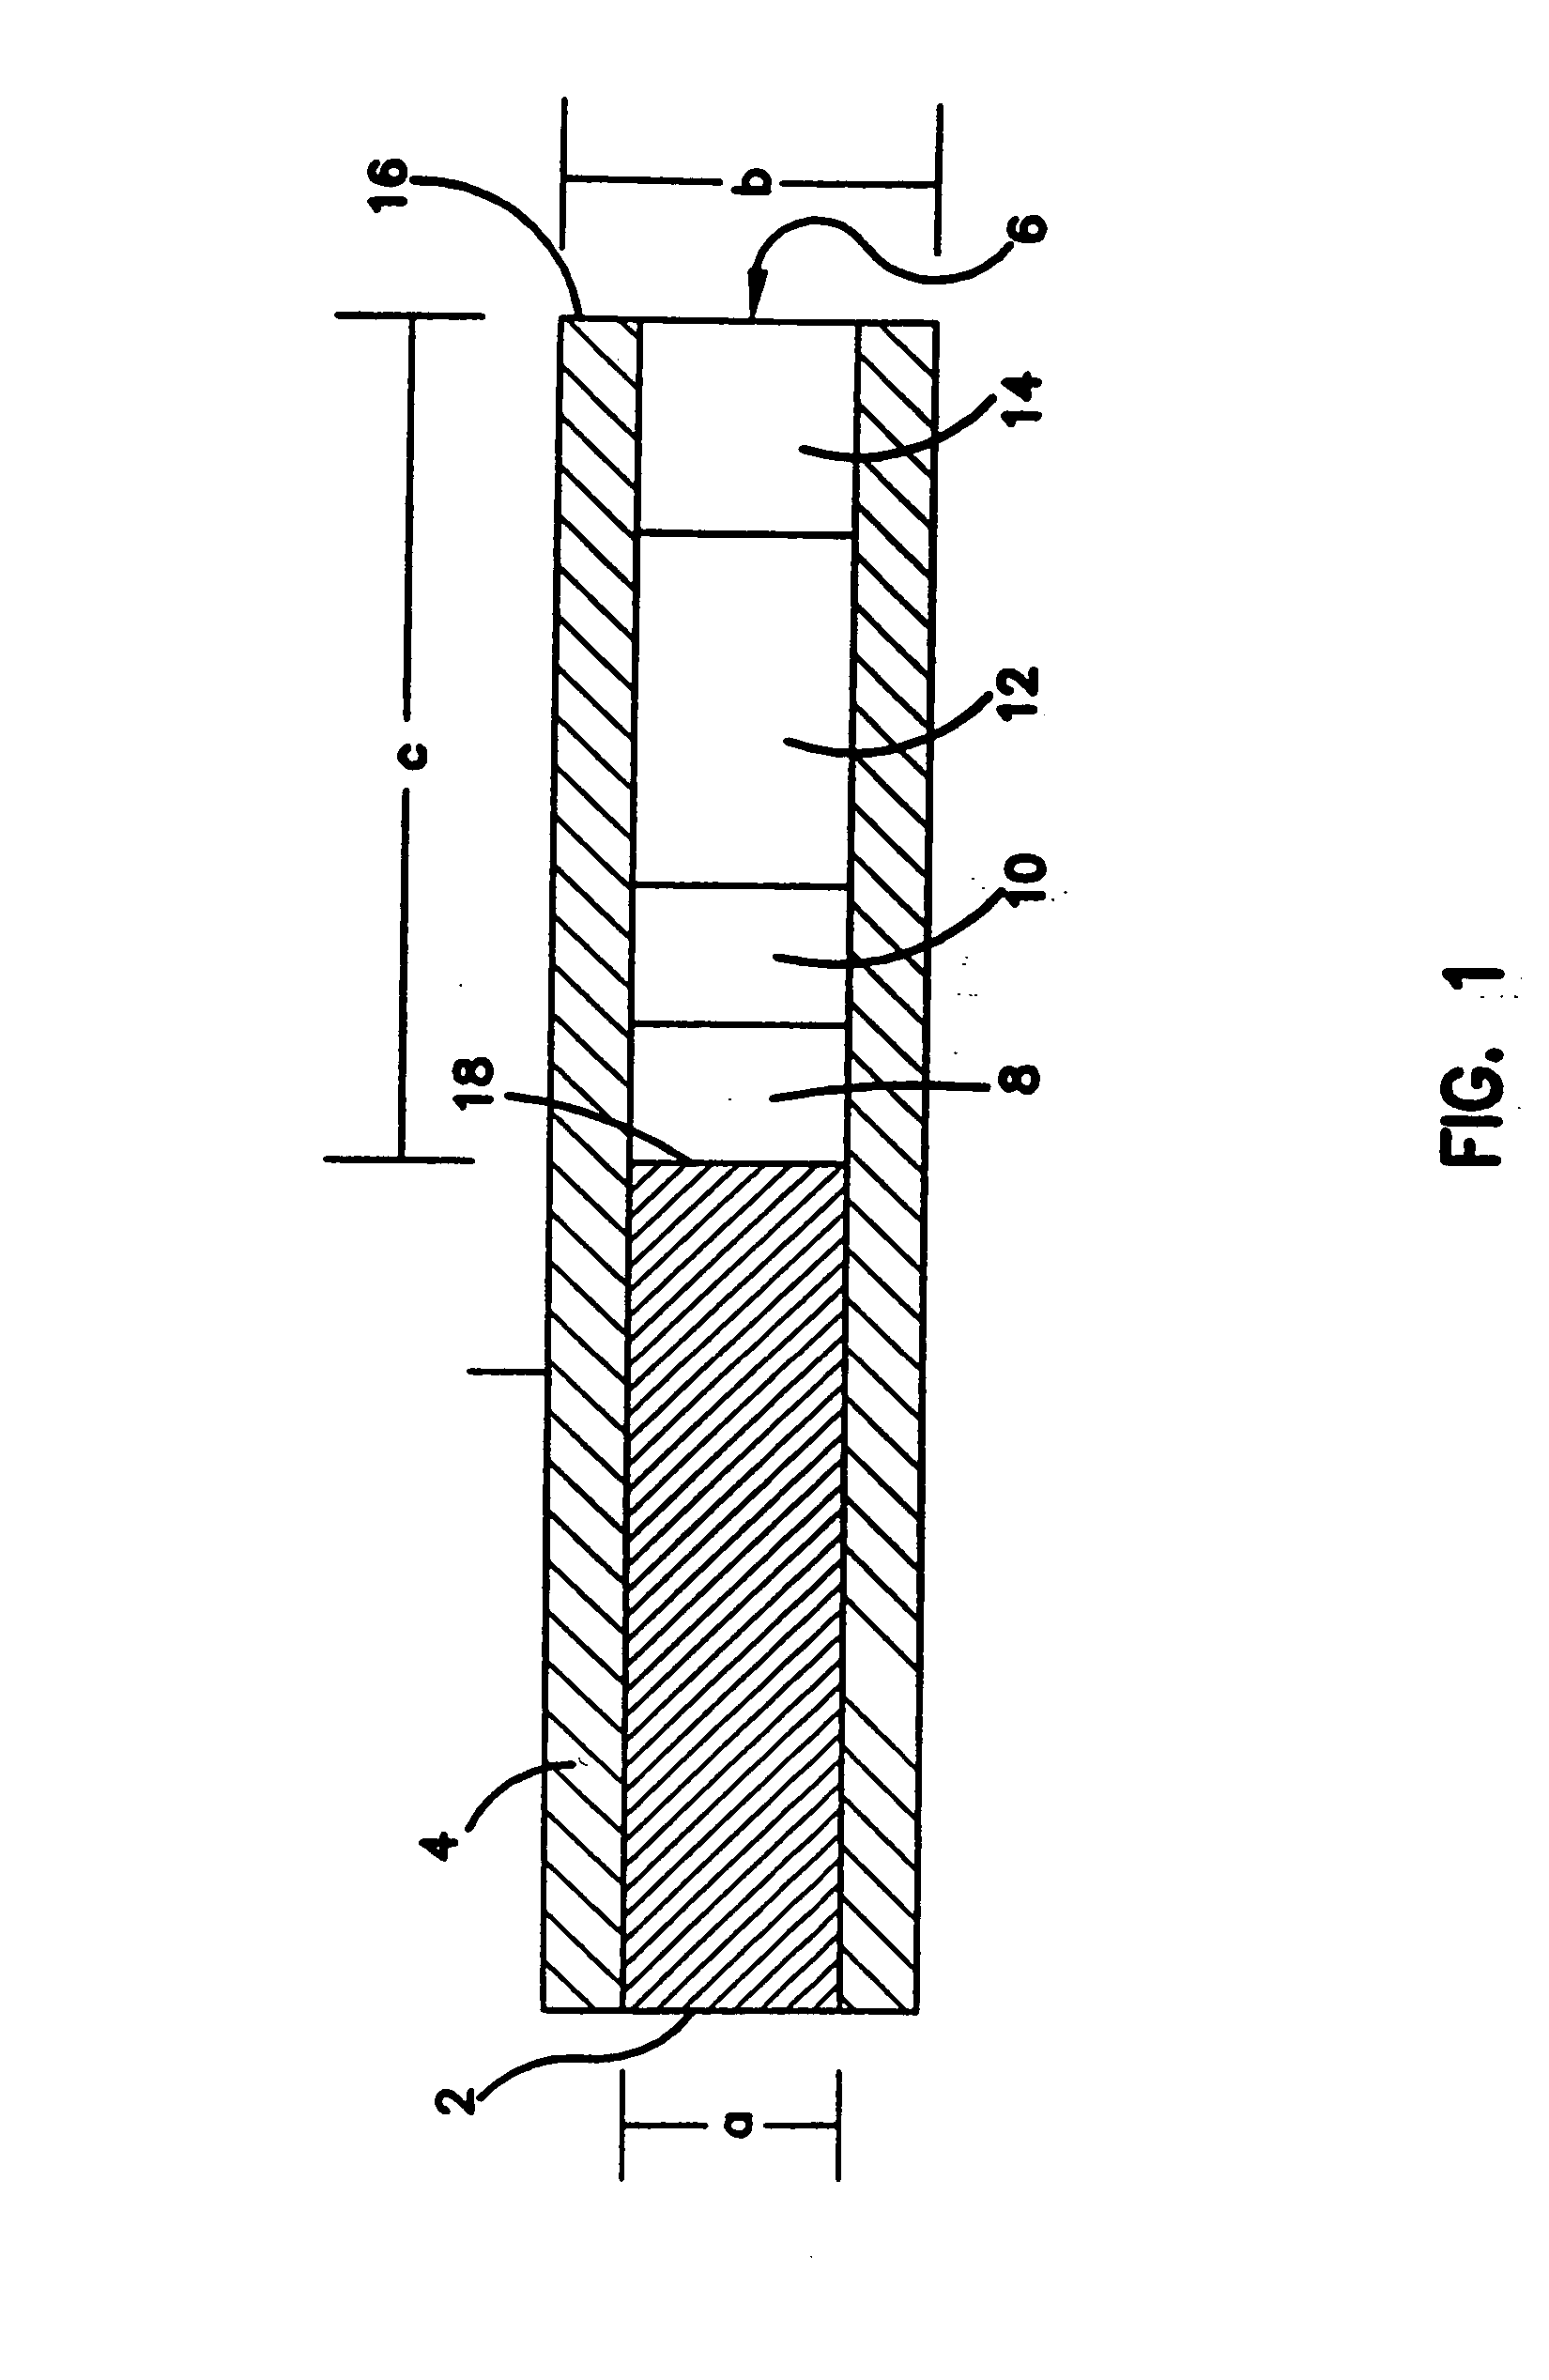 Method of determining analyte level using subcutaneous electrode